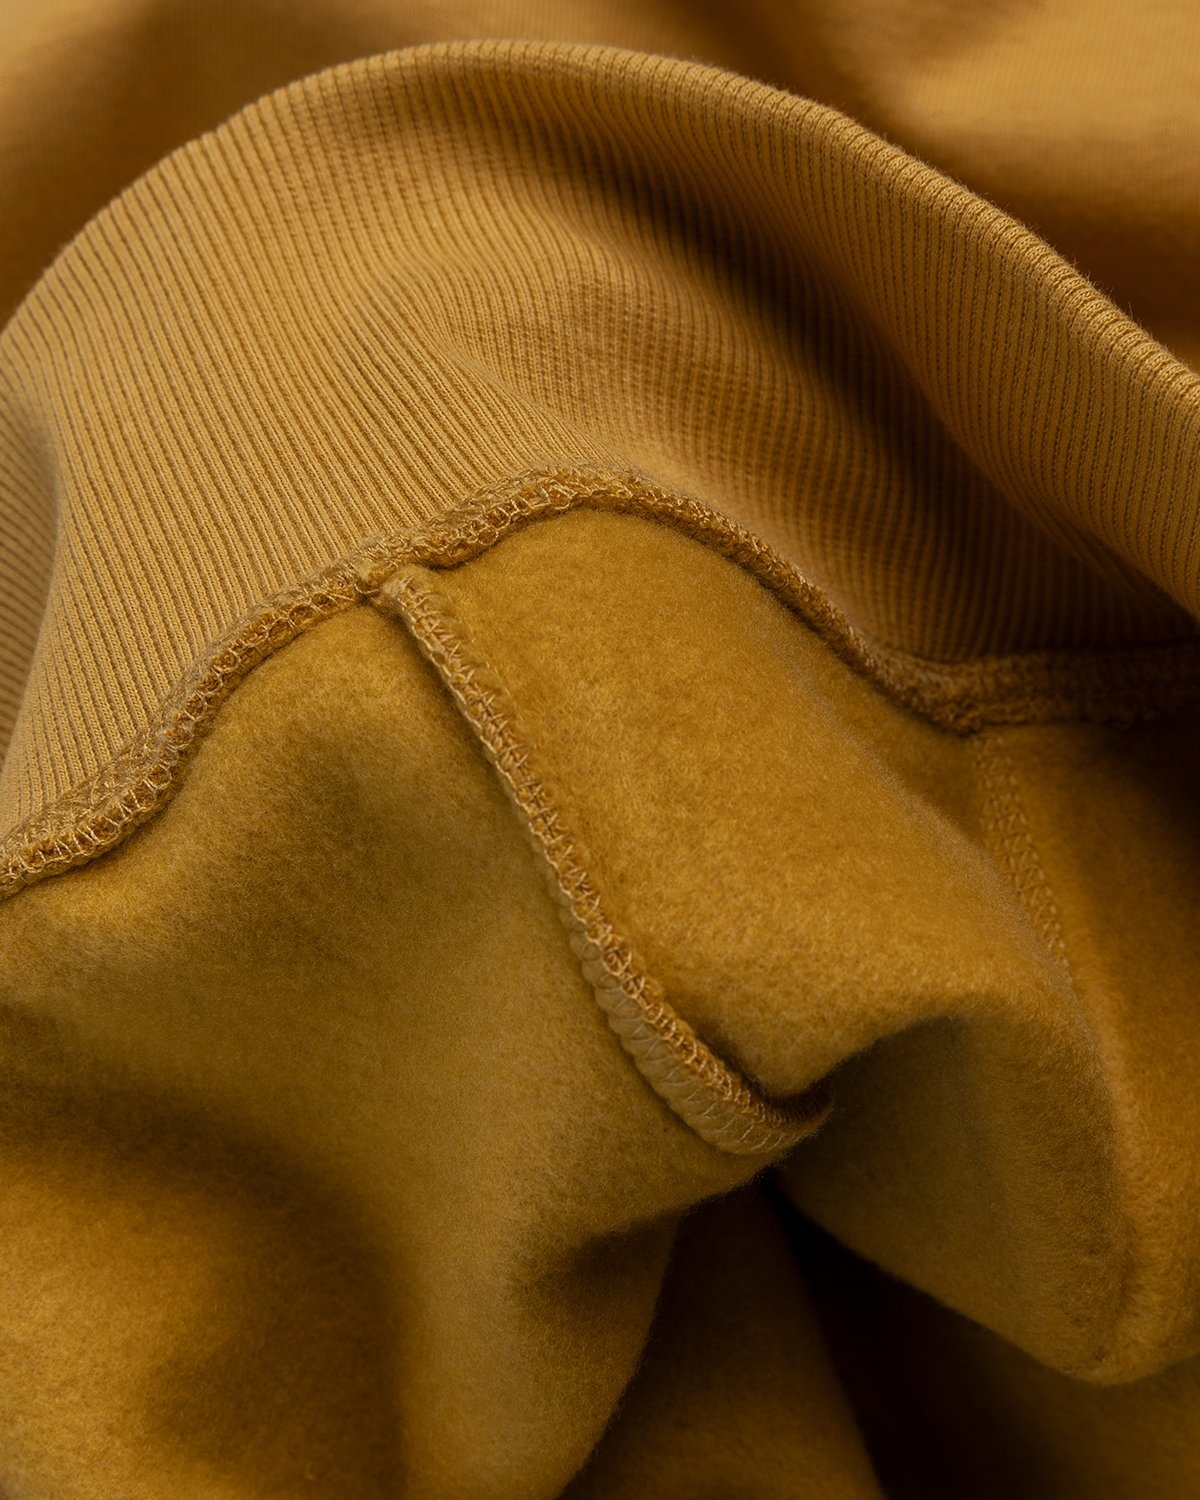 Carhartt WIP – Hooded Chase Sweat Gold - Sweats - Brown - Image 5